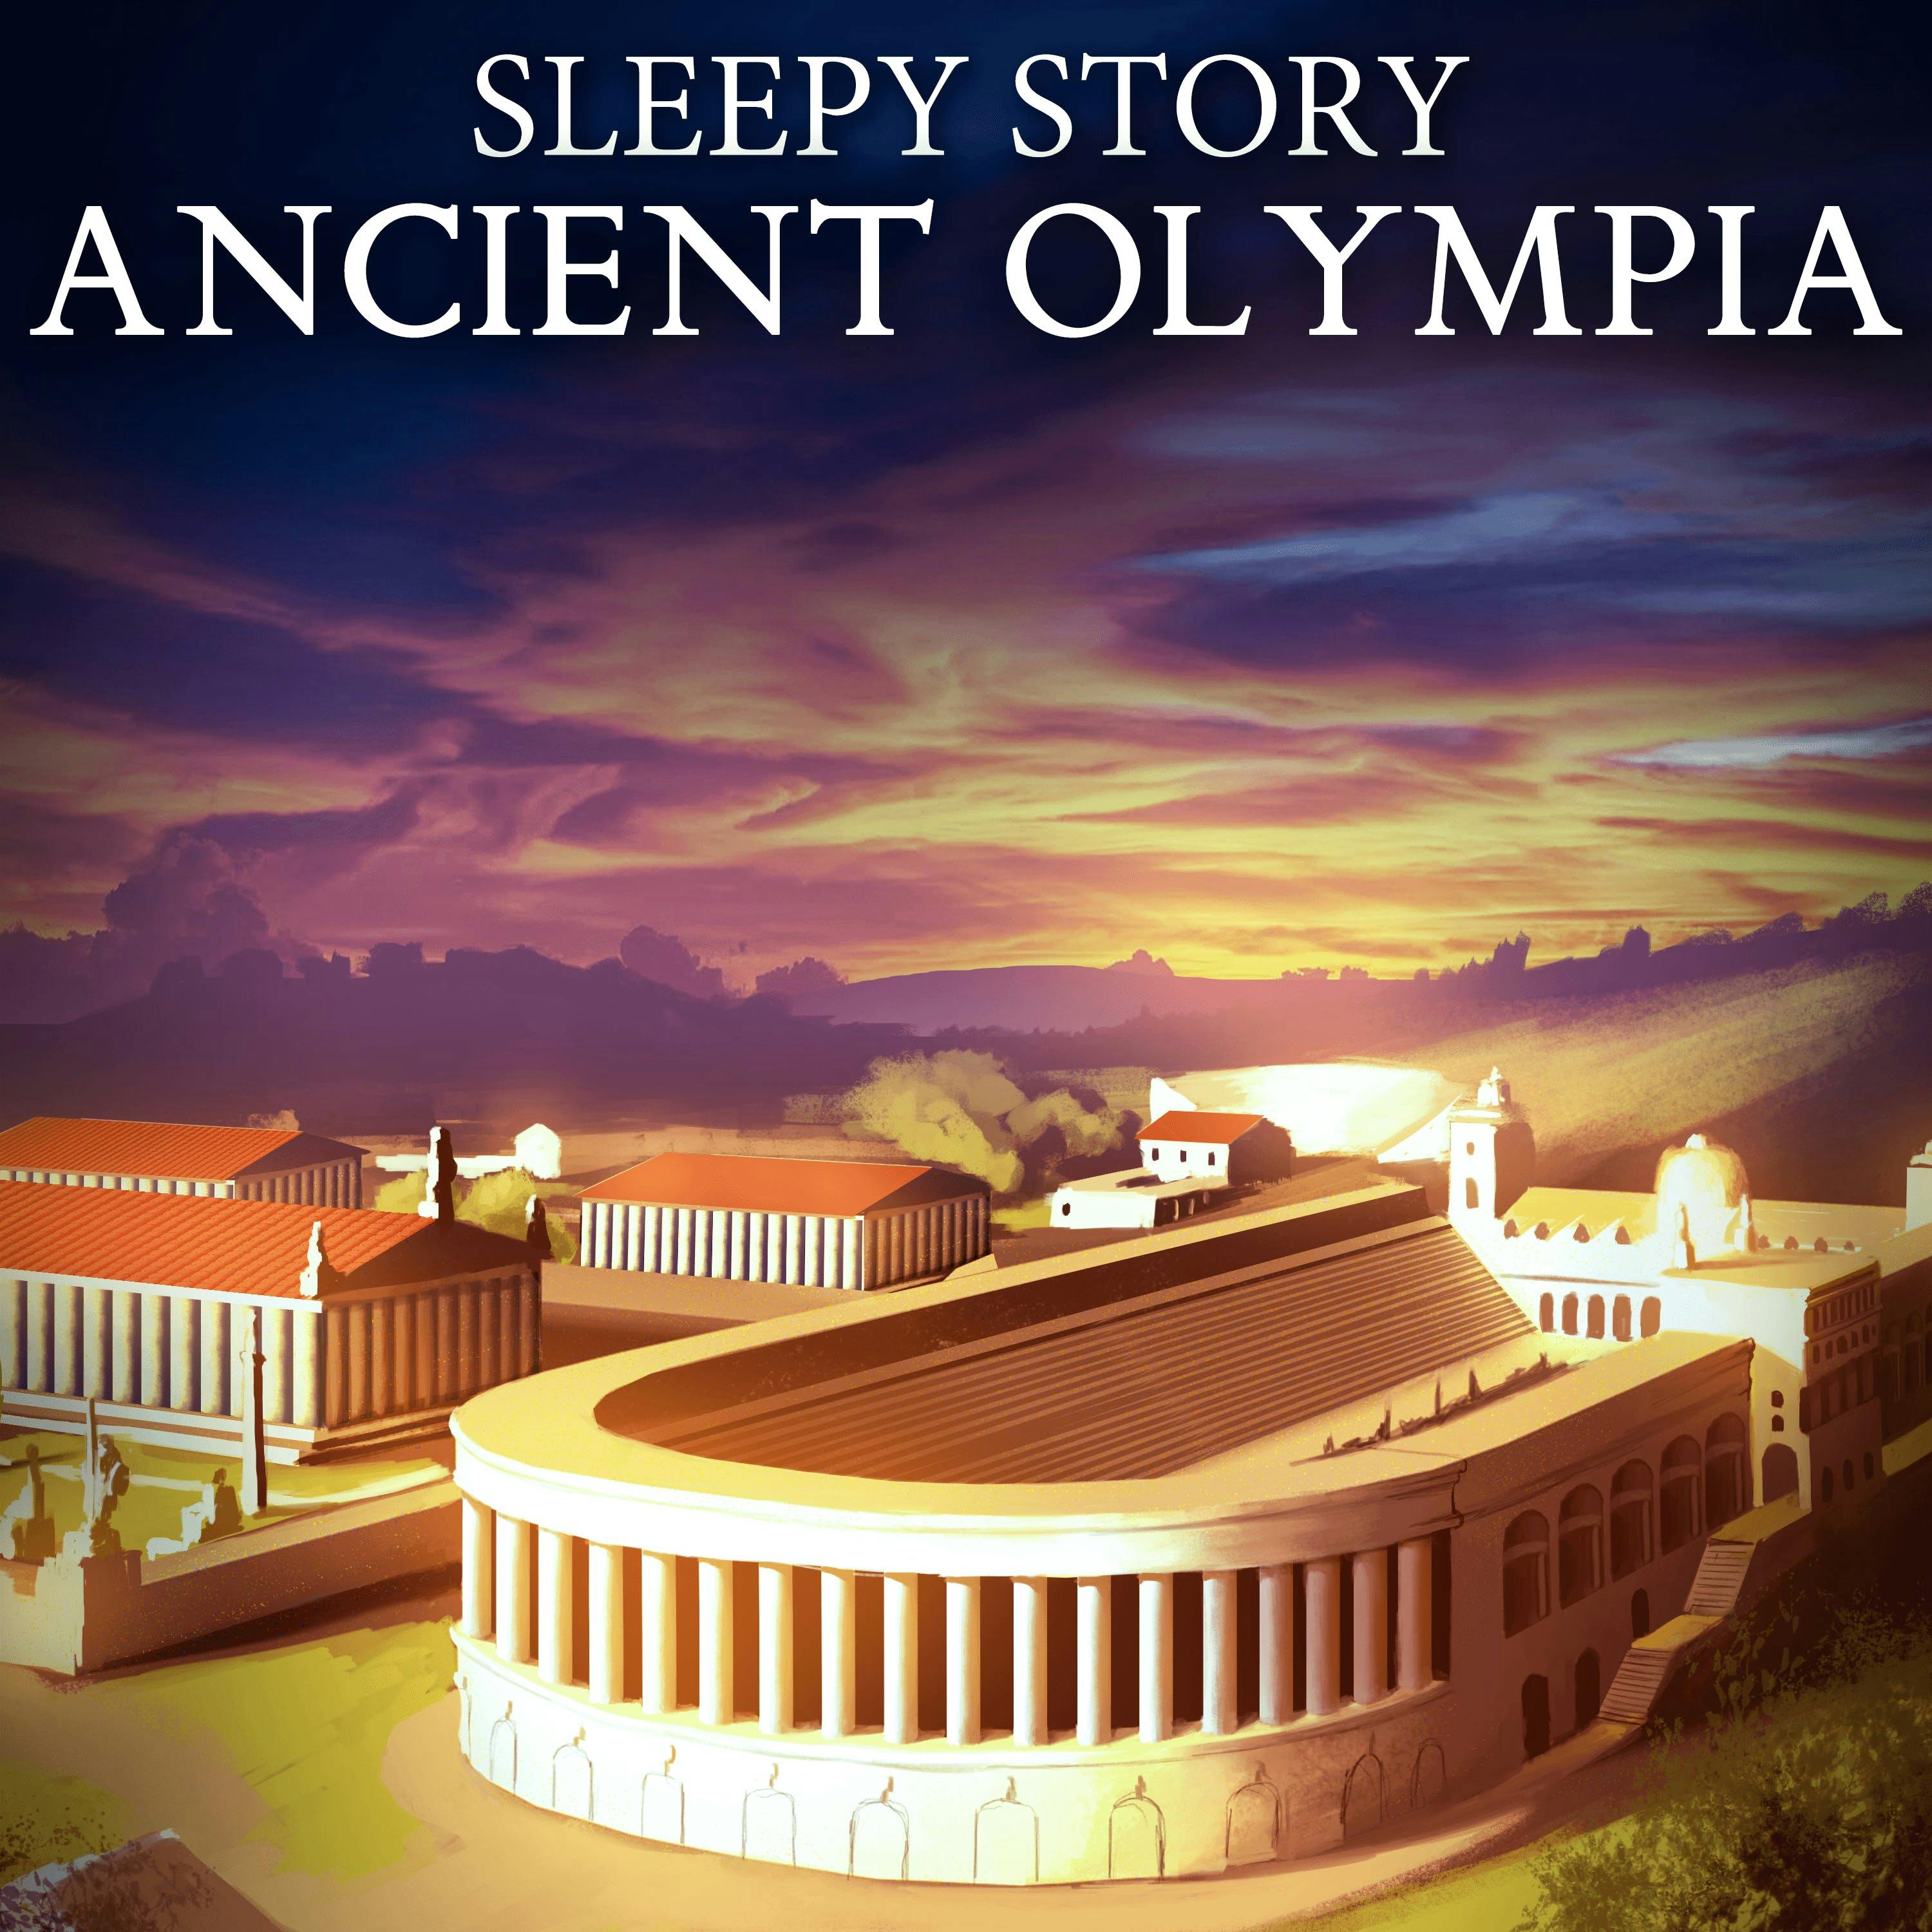 Exploring Ancient Olympia - Guided Sleep Story